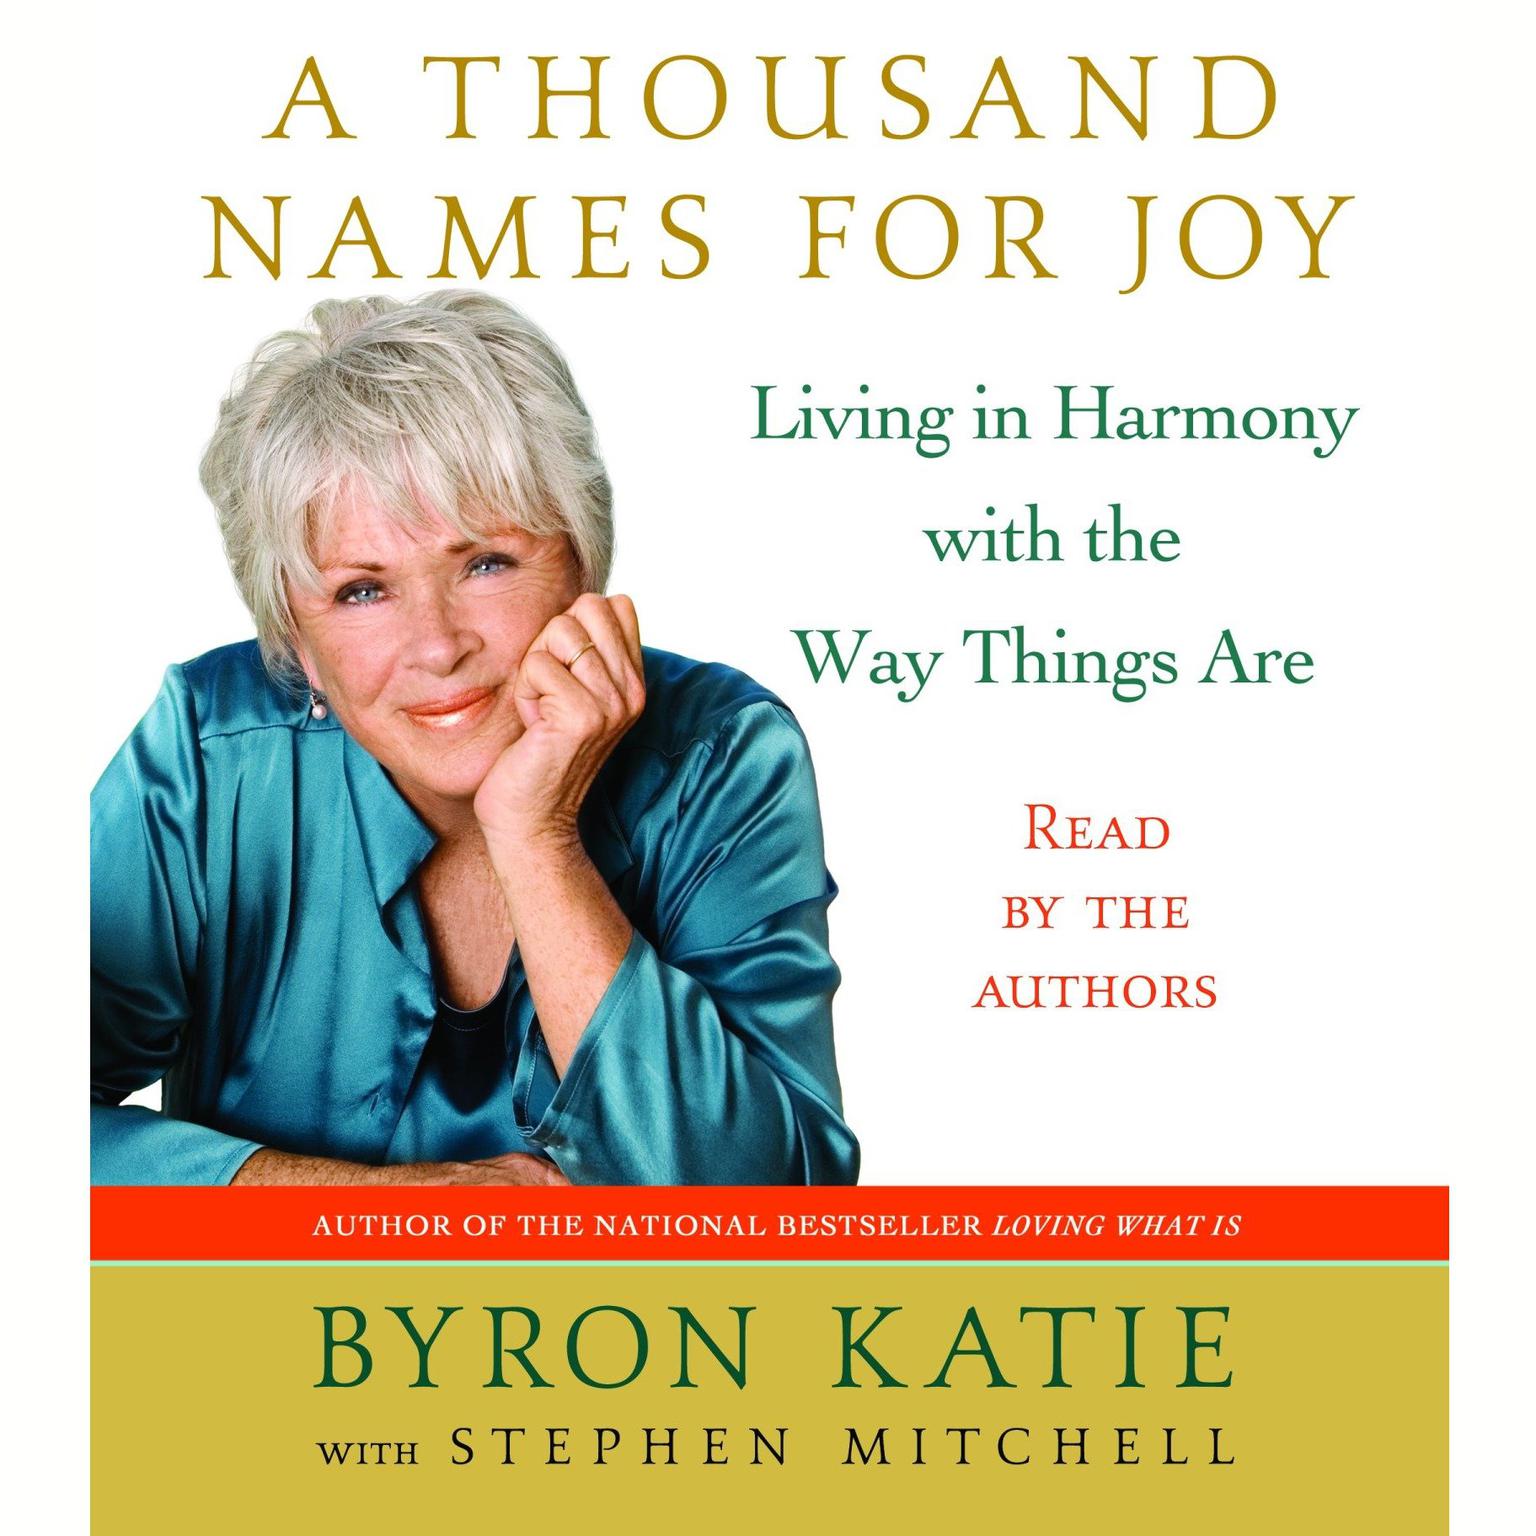 A Thousand Names for Joy (Abridged): Living in Harmony with the Way Things Are Audiobook, by Byron Katie